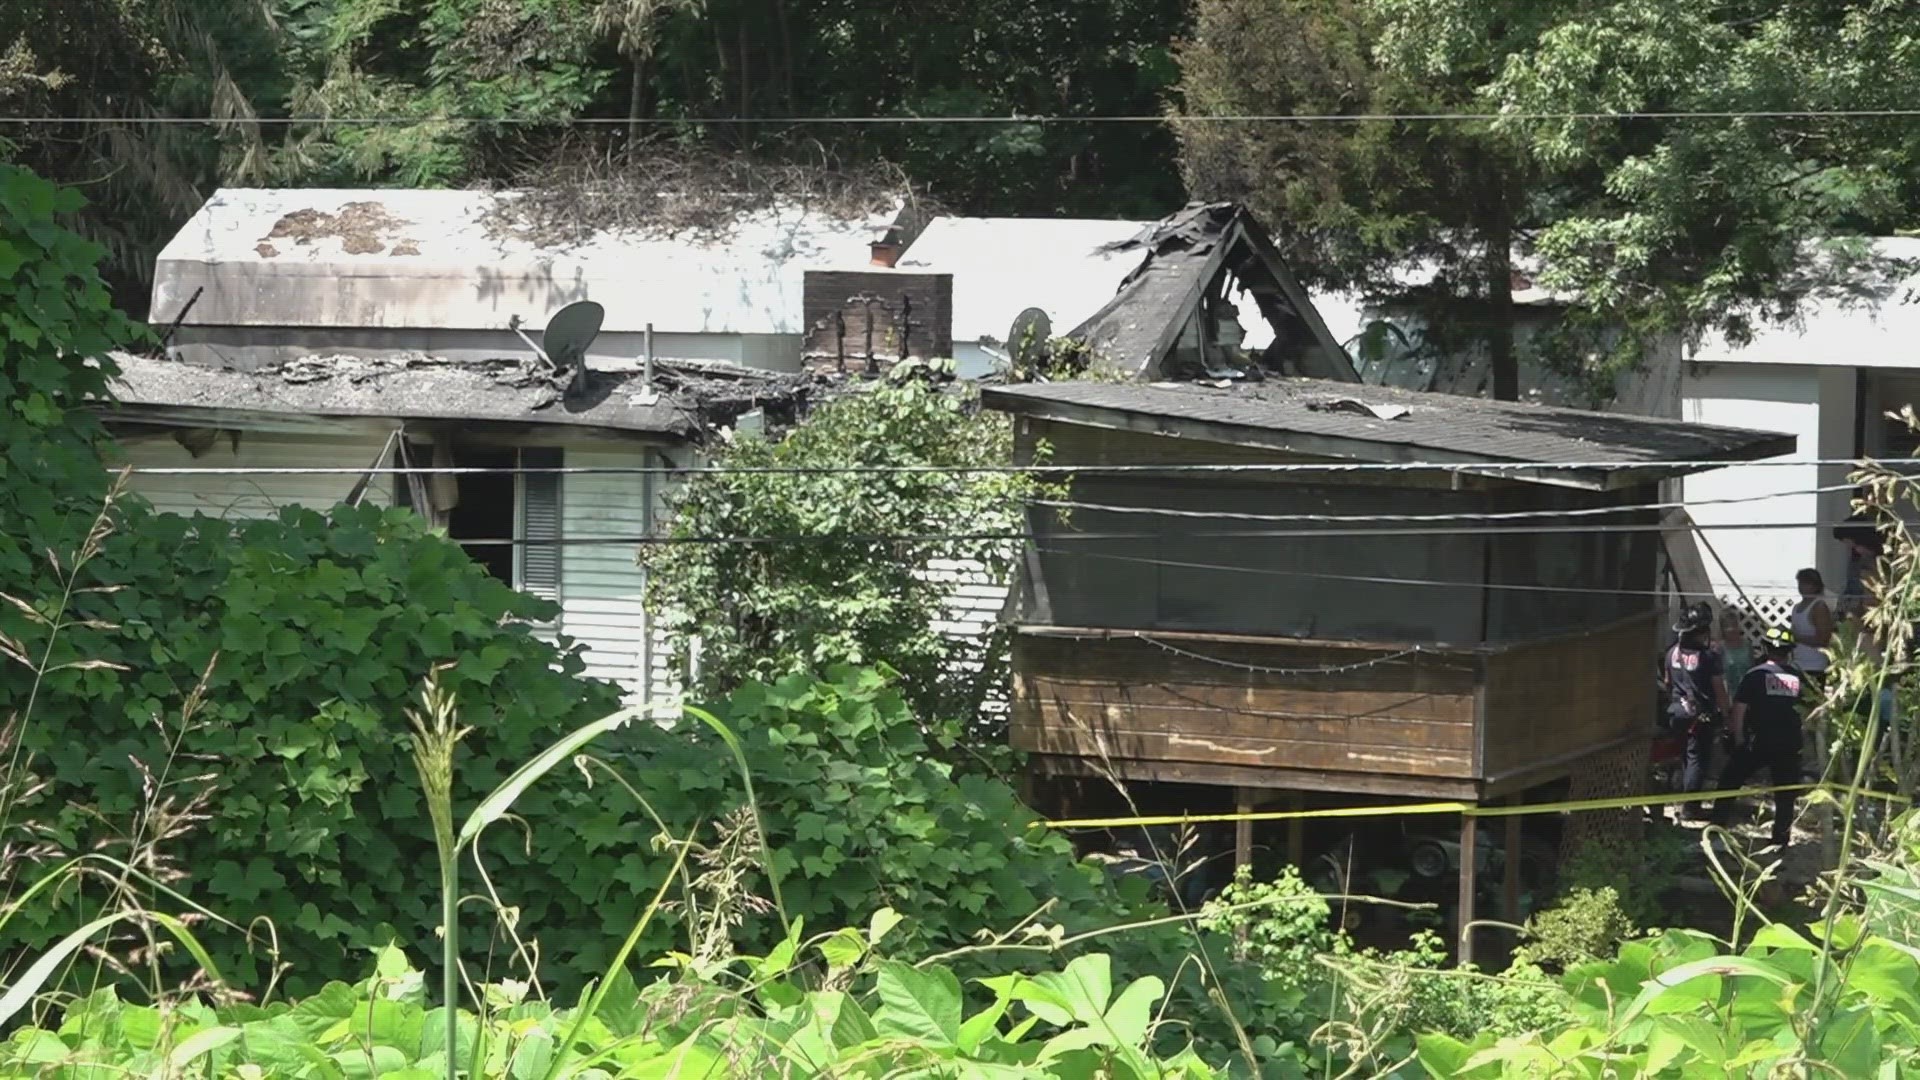 The body of 38-year-old Brittany L. Justus was discovered inside the home after the fire was extinguished, according to SCSO.